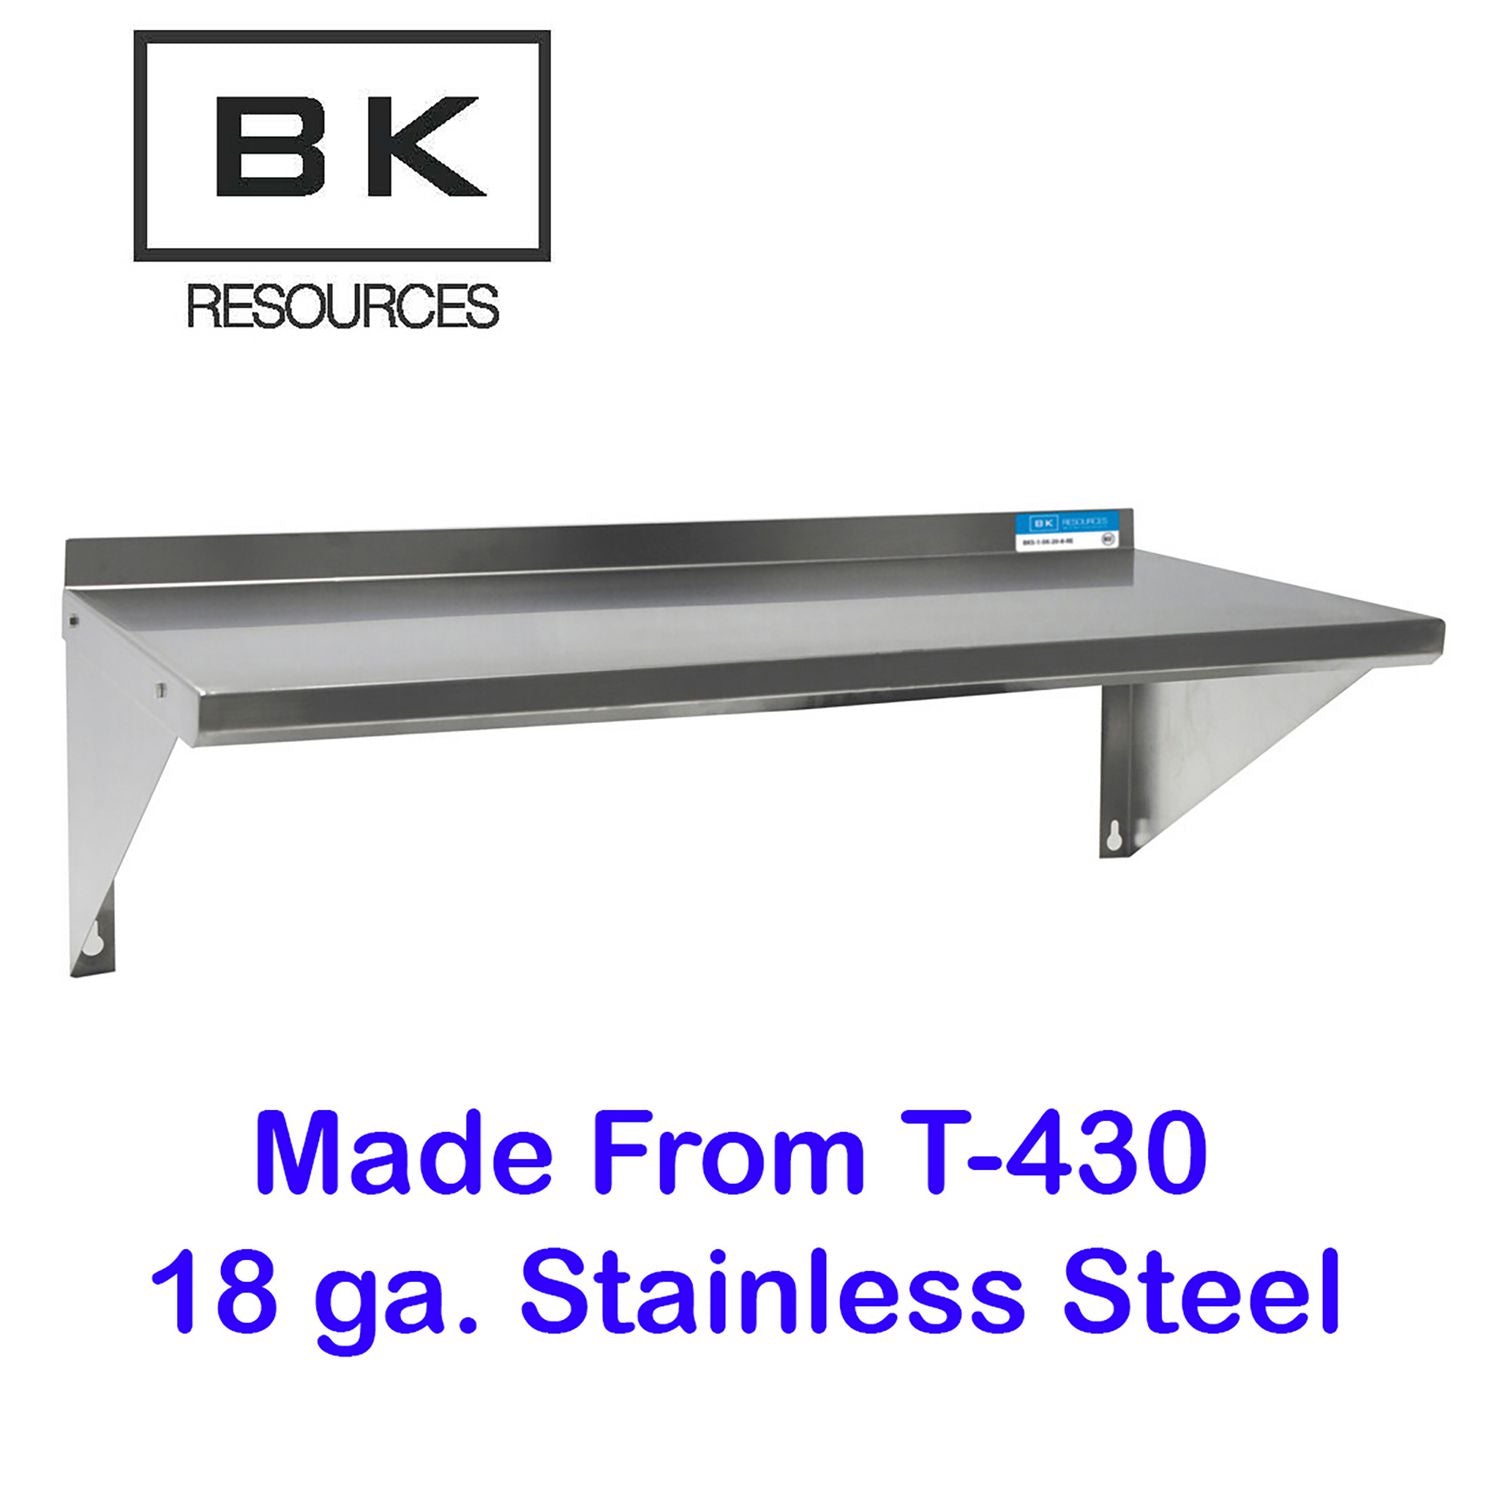 stainless-steel-economy-overshelf-60w-x-12d-x-8h-stainless-steel-silver-2-pallet-ships-in-4-6-business-days_bke2wse1260 - 3